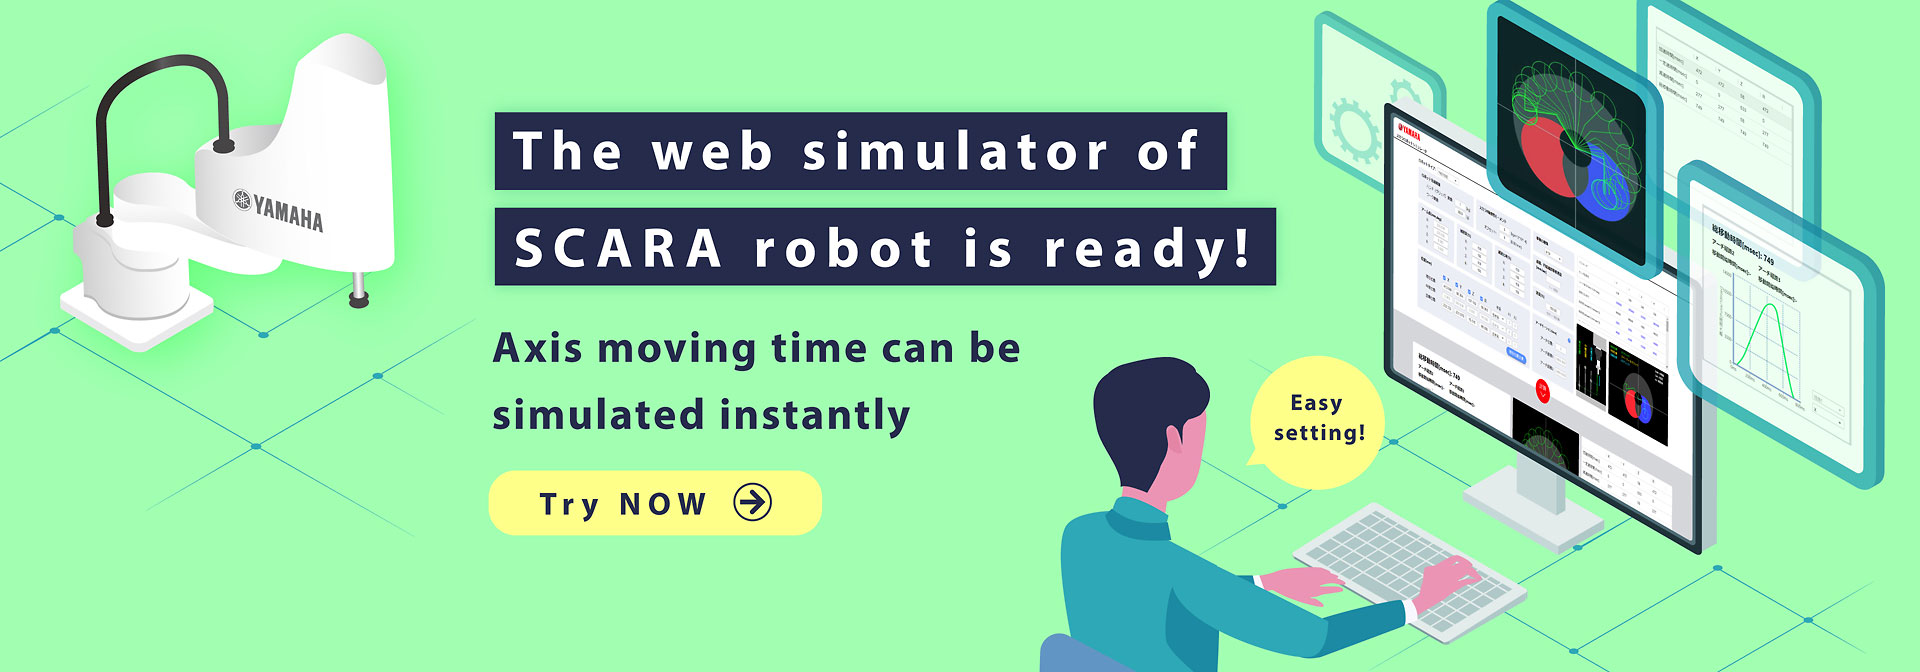 The web simulator of SCARA robot is ready!